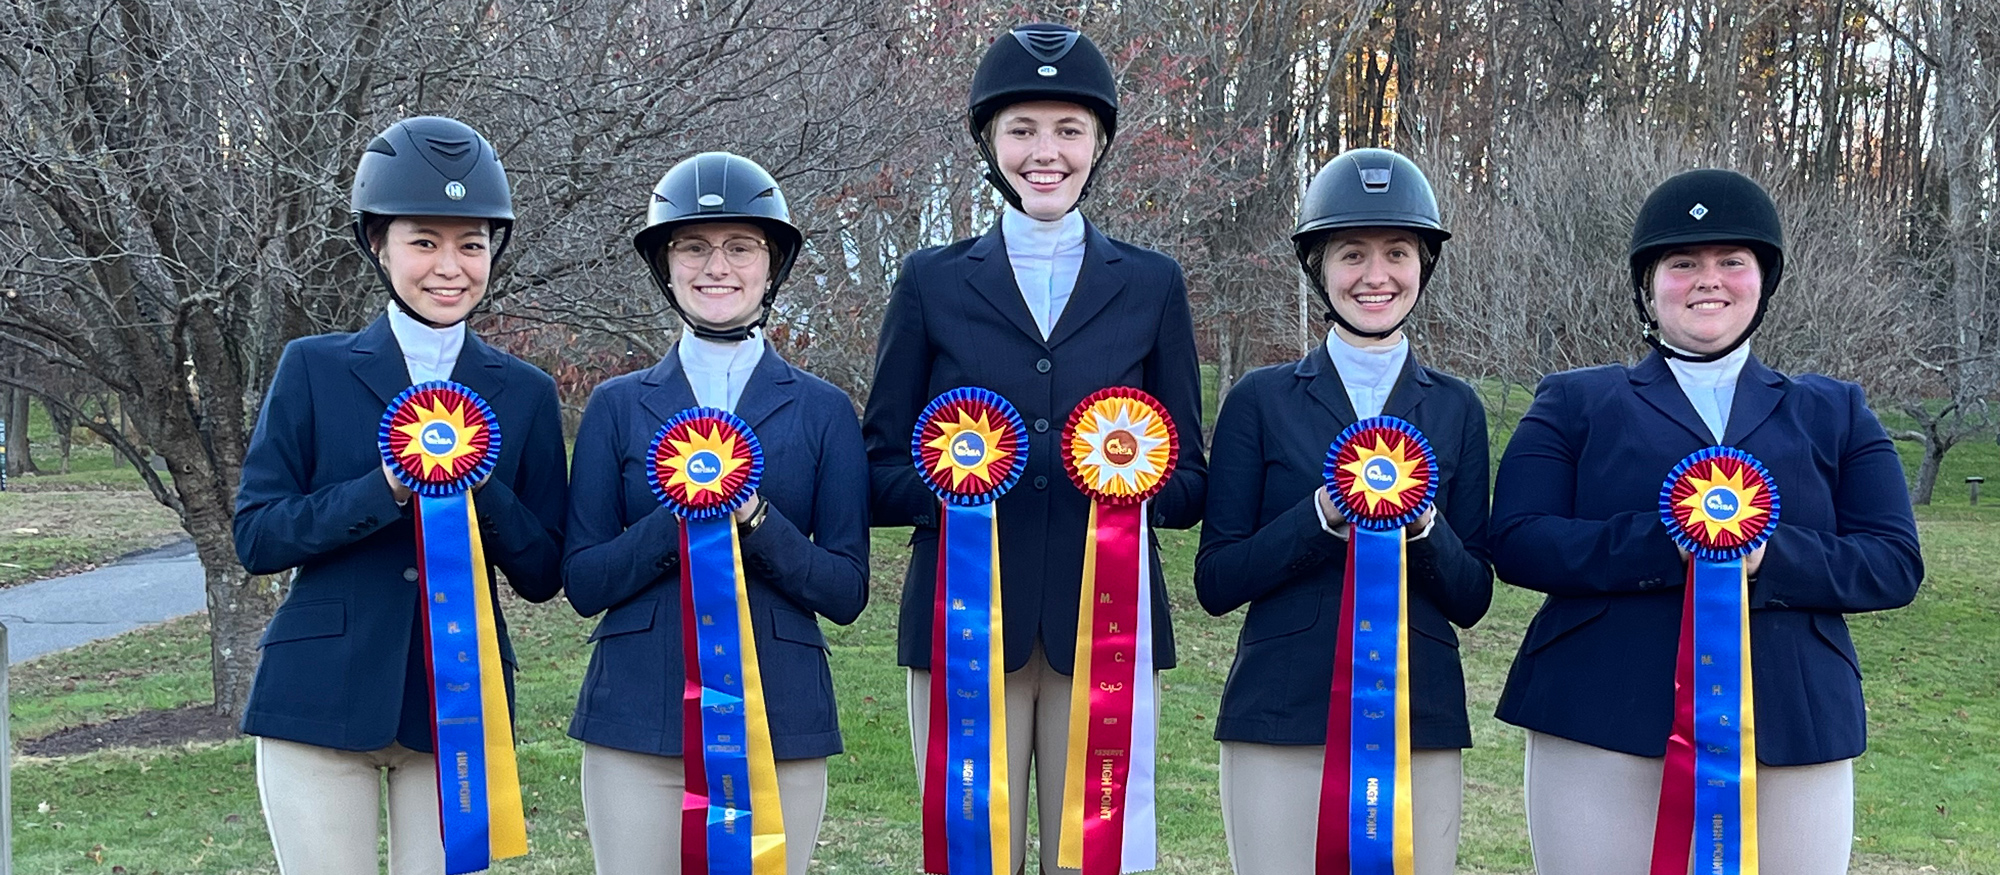 Winning awards for Mount Holyoke at its second home show of the fall 2023 regular season were (left to right): Ririka Kakuta (High Point Champion Introductory Rider), Cate Bates (High Point Champion Limit Rider), Chloe McElveen (Reserve High Point Rider and the High Point Champion Limit Rider), Helena Weiss (Champion High Point Rider), and Elliott Candela (Introductory High Point Rider).